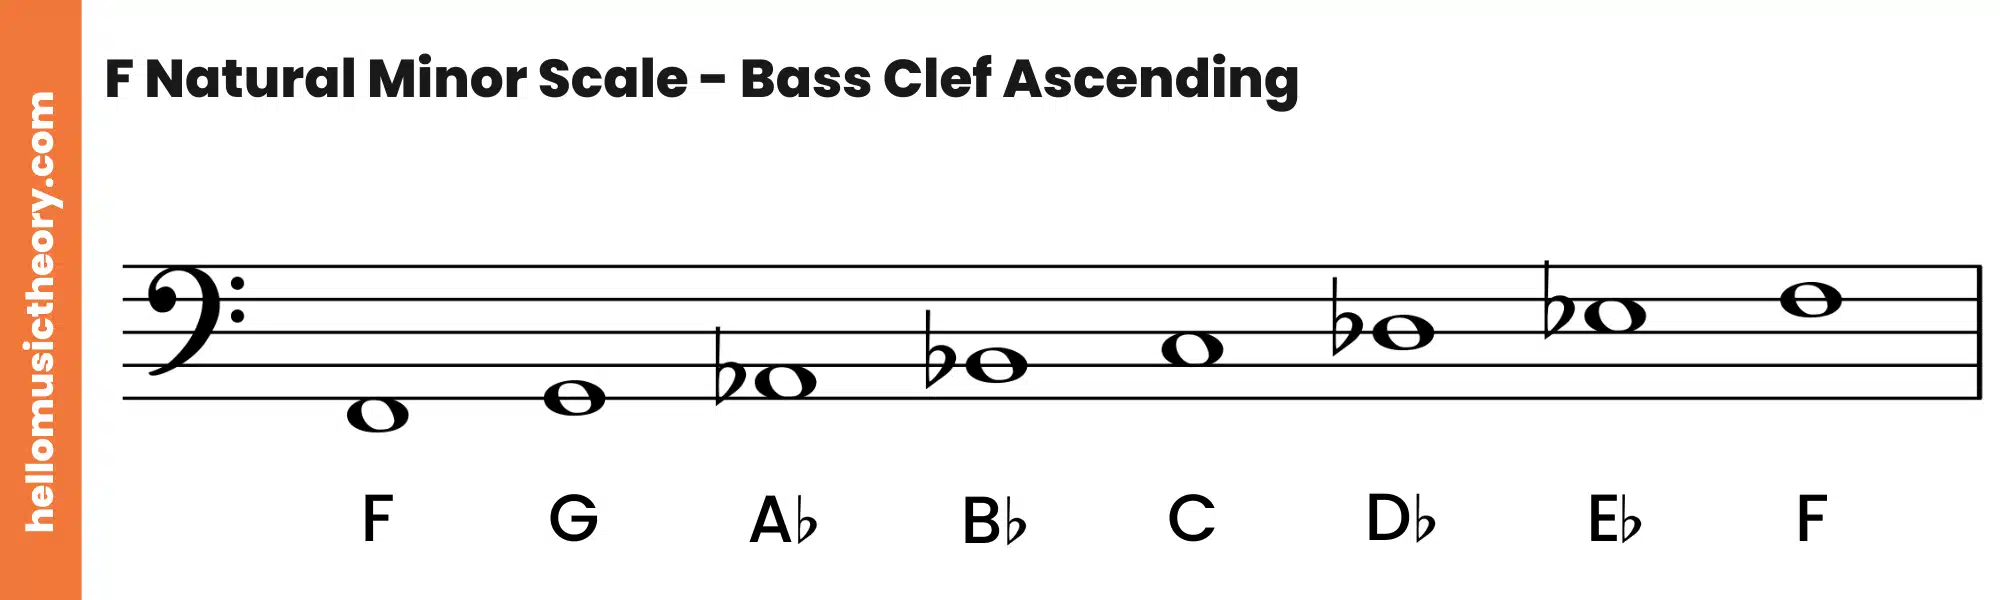 F Natural Minor Scale Bass Clef Ascending